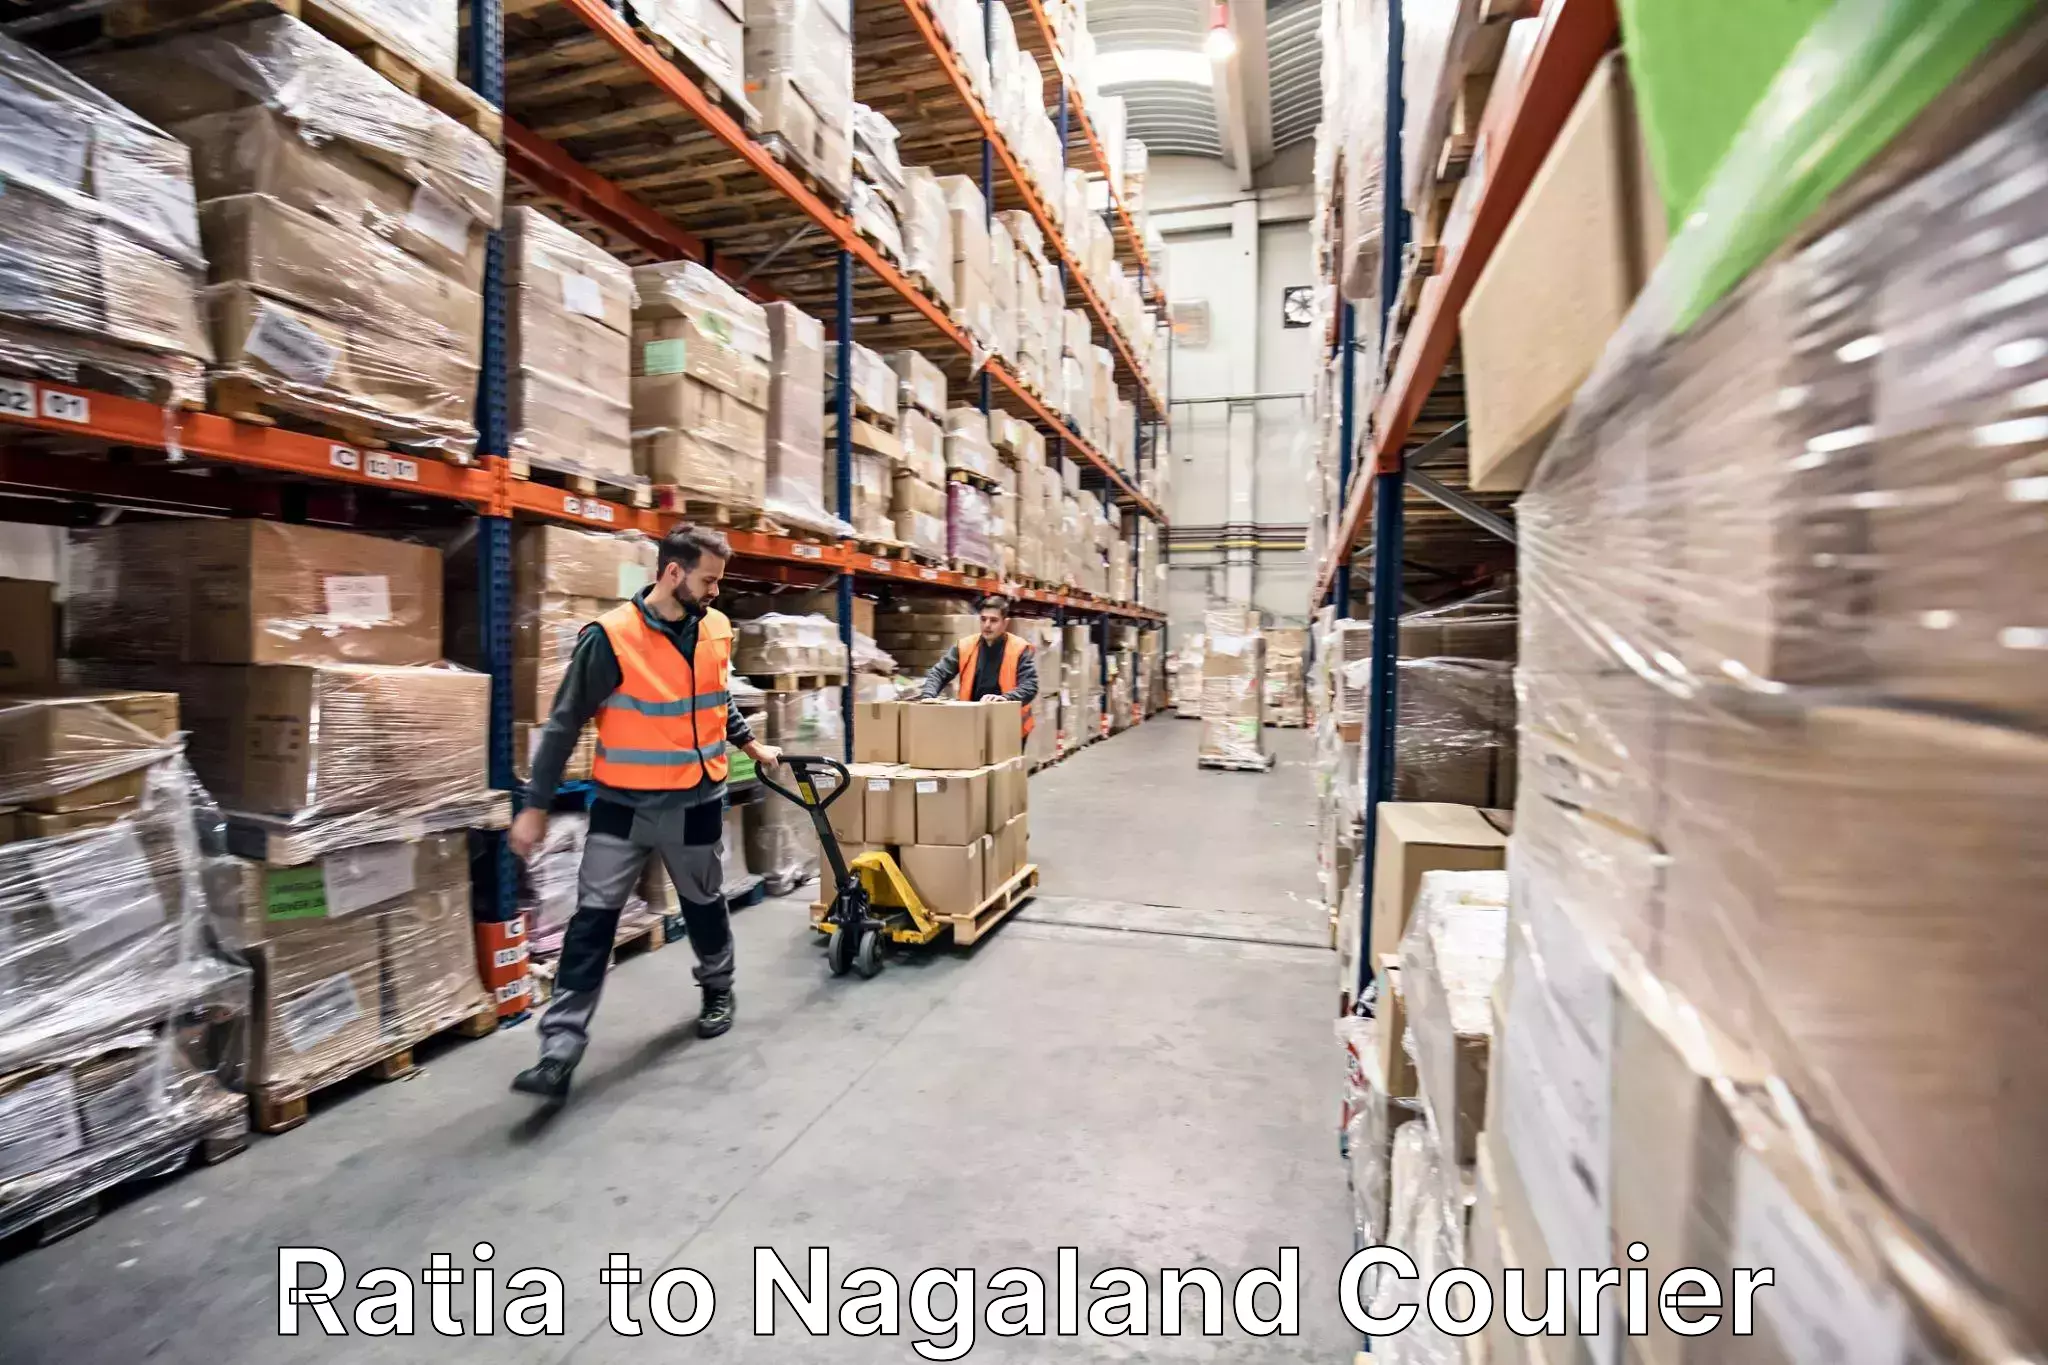 Household moving experts Ratia to Nagaland